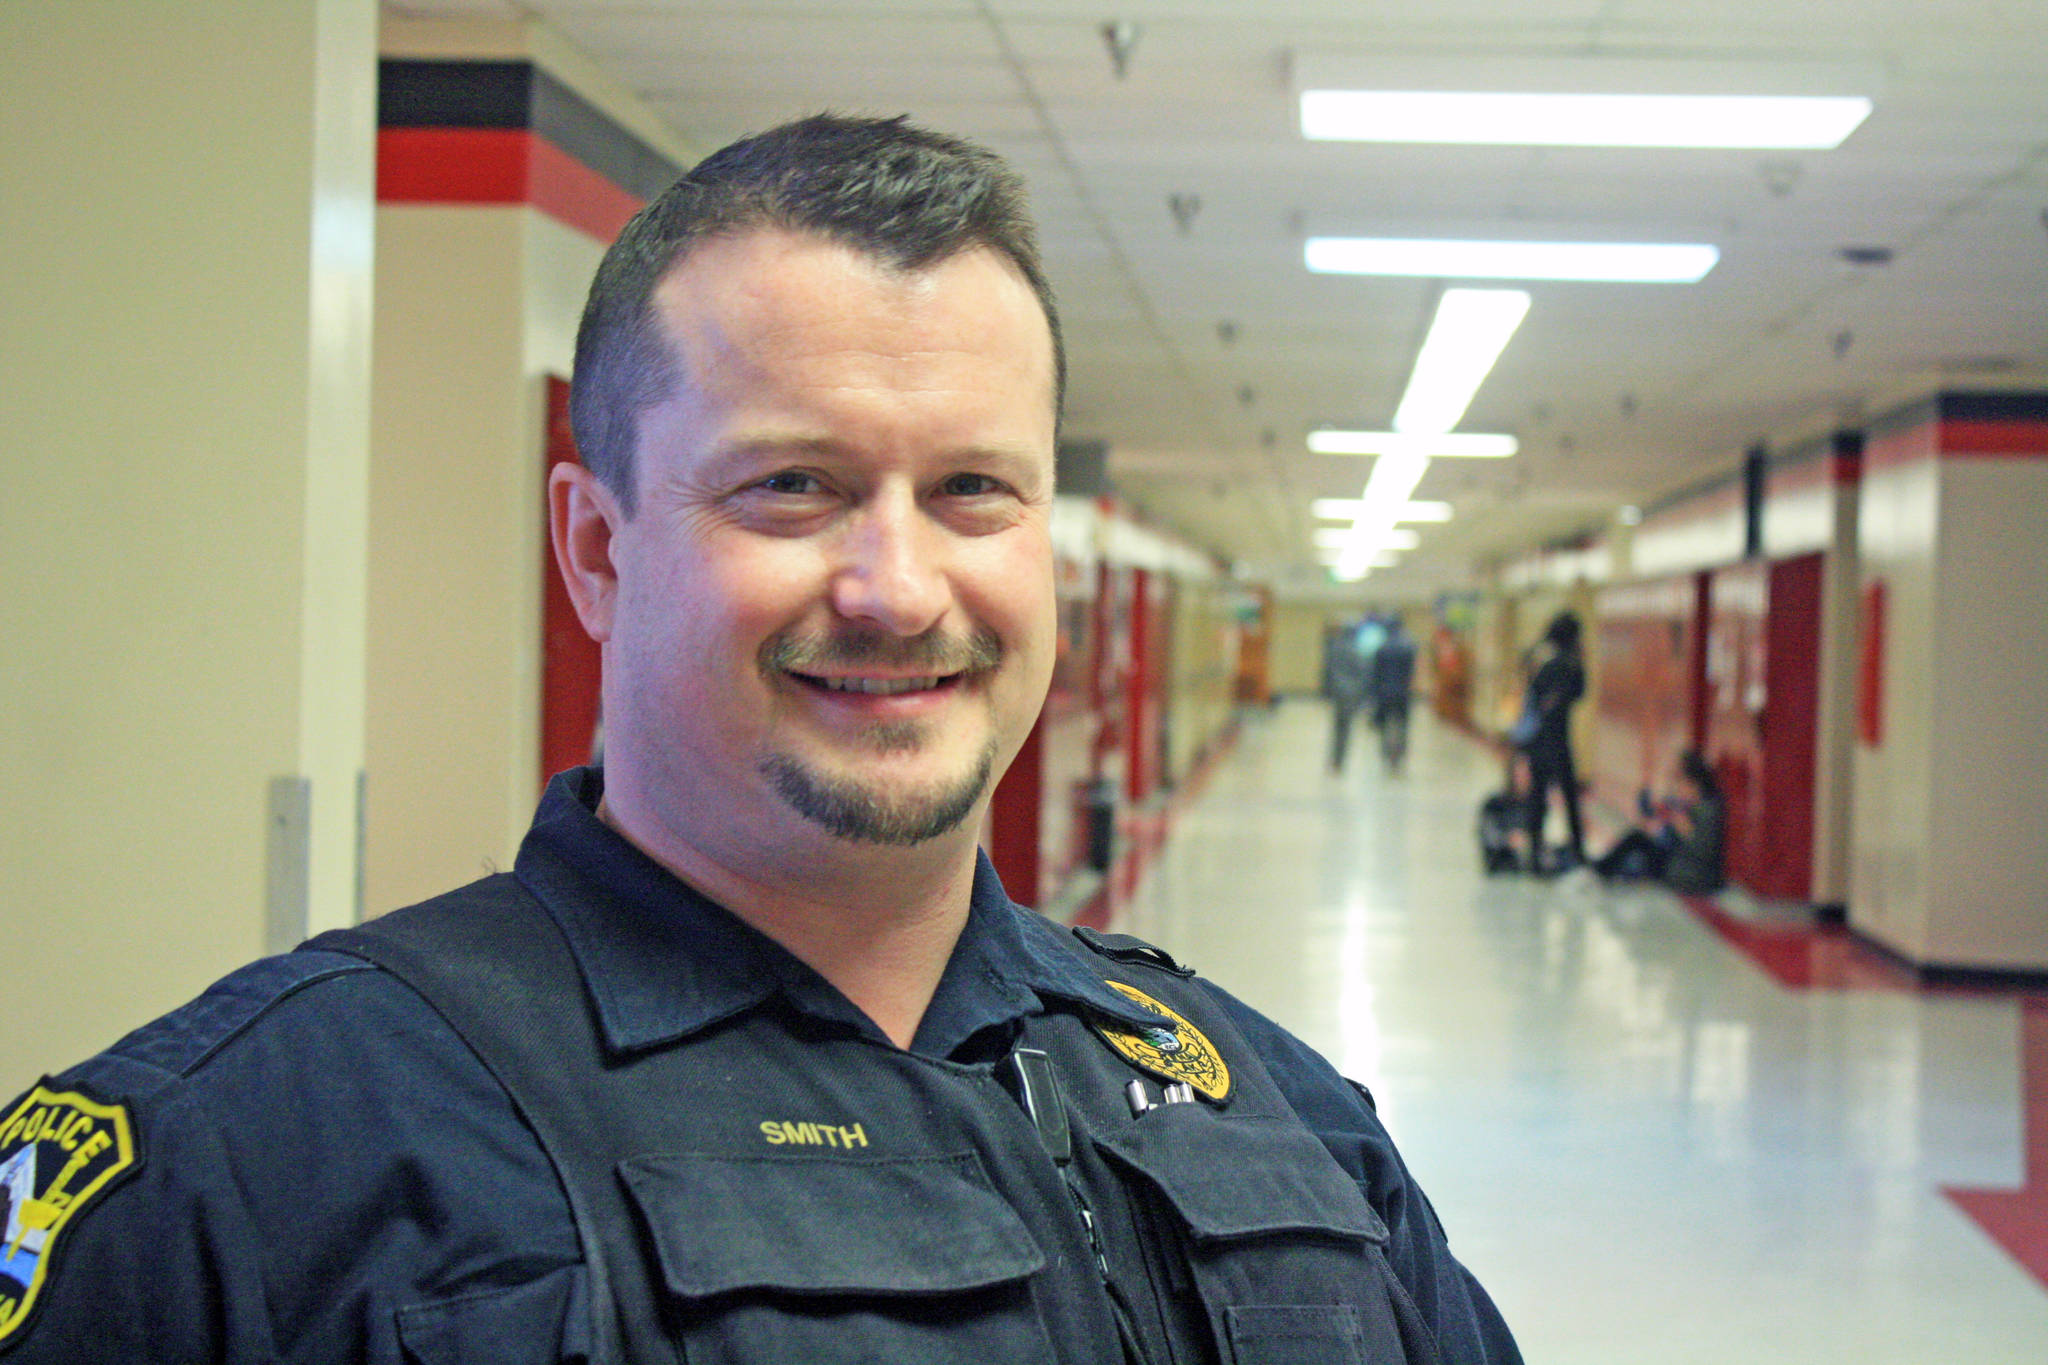 Kenai Police Officer Dan Smith, school resource officer and investigator, at Kenai Central High School on March 5. Smith acts as a liaison between law enforcement and the schools. (Photo by Erin Thompson/Peninsula Clarion)